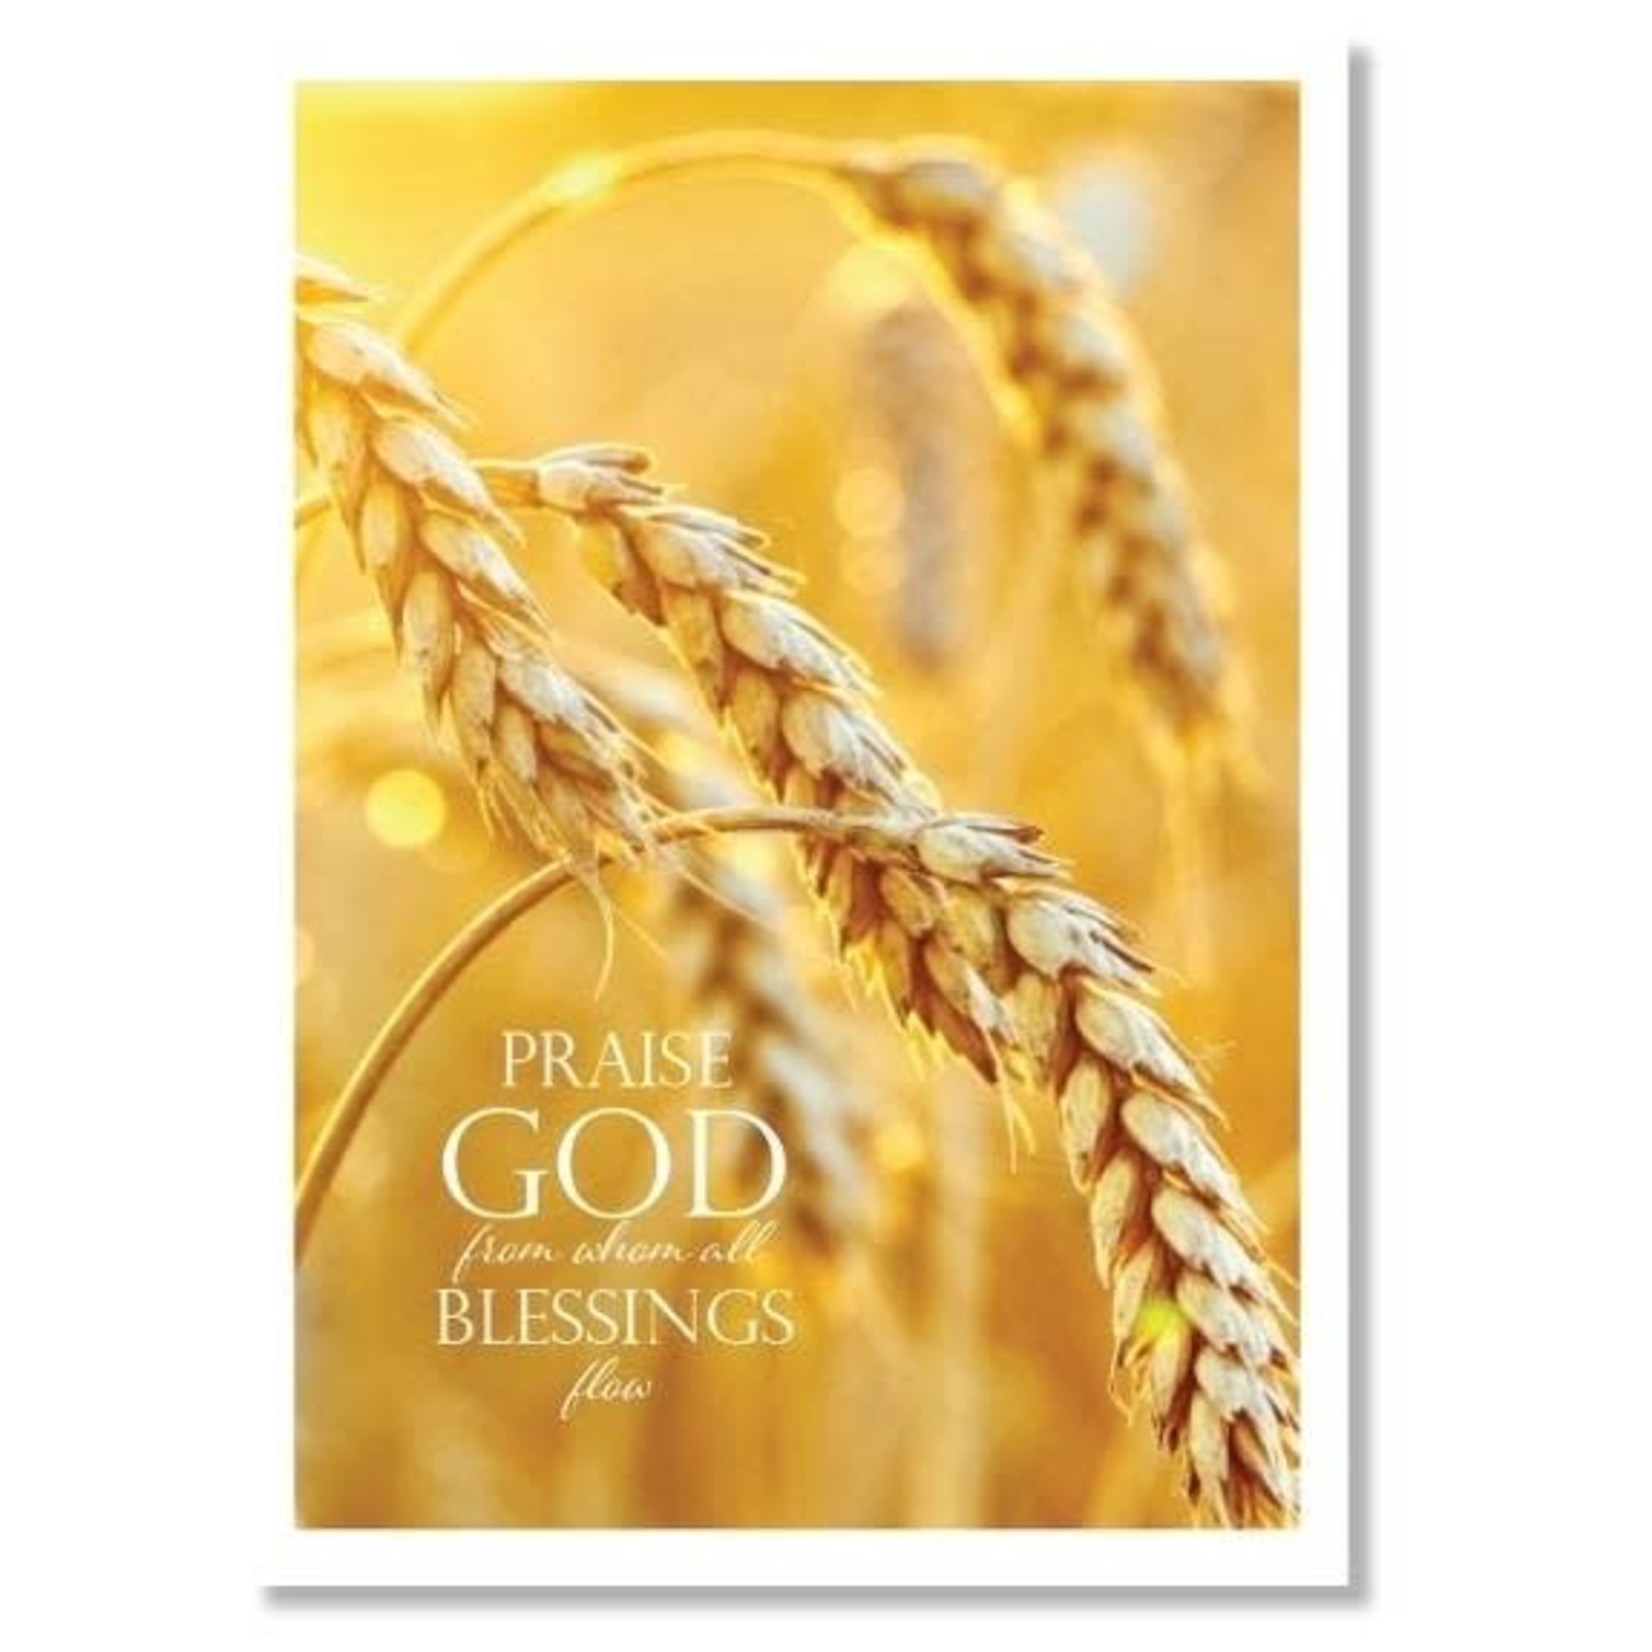 Hymns In My Heart - 5x7" Greeting Card - Wedding Anniversary - Praise God From Whom All Blessings Flow